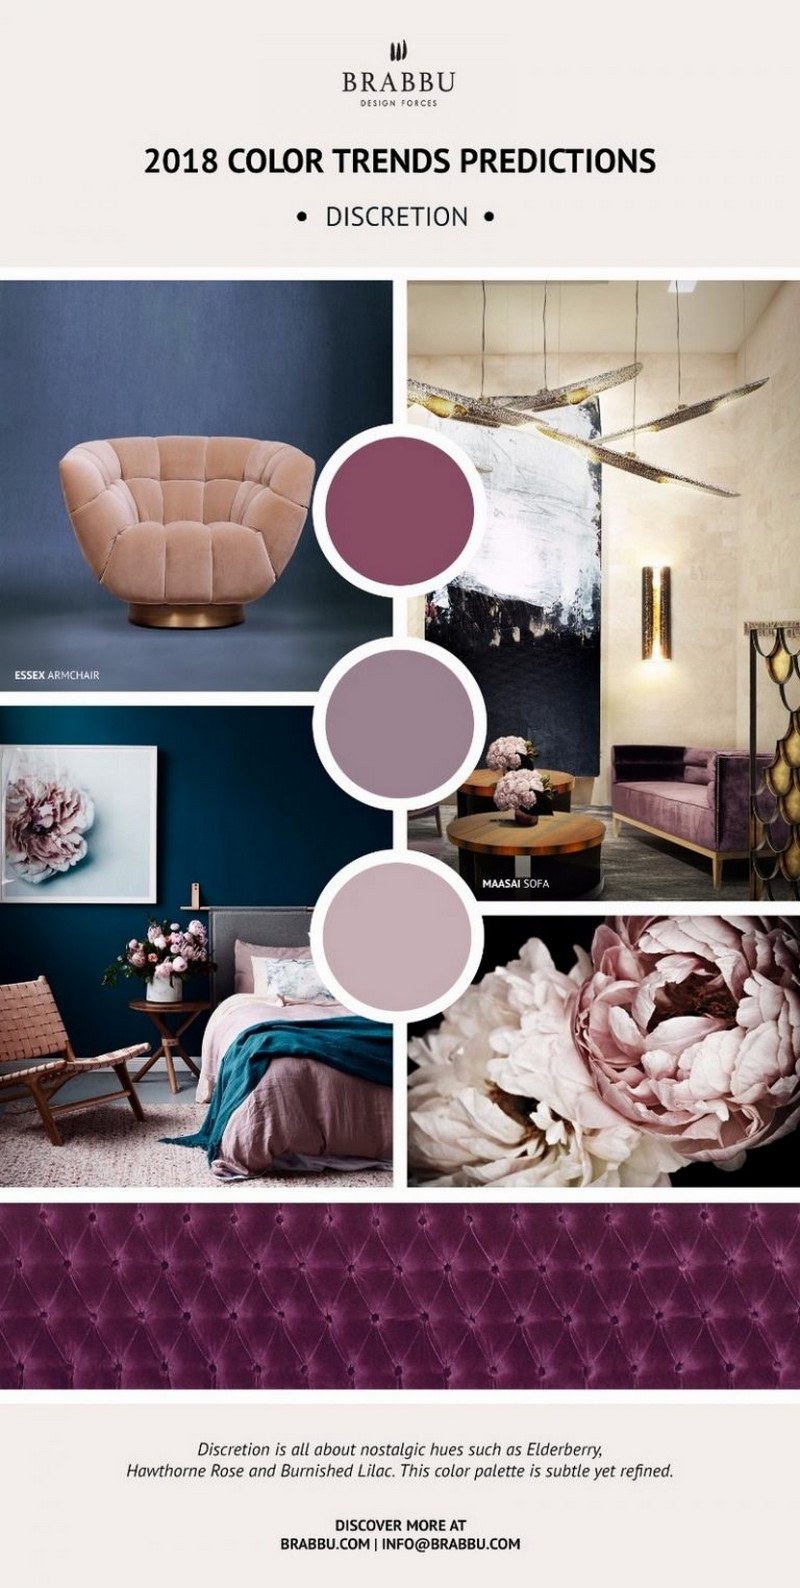 Get Inspired by Pantone's Color Trend Predictions for 2018 ➤ Discover the season's newest designs and inspirations. Visit Design Build Ideas at www.designbuildideas.eu #designbuildideas #interiordesign #pantone #pantone2018 #colorscheme #colorschemeideas @designbuildidea